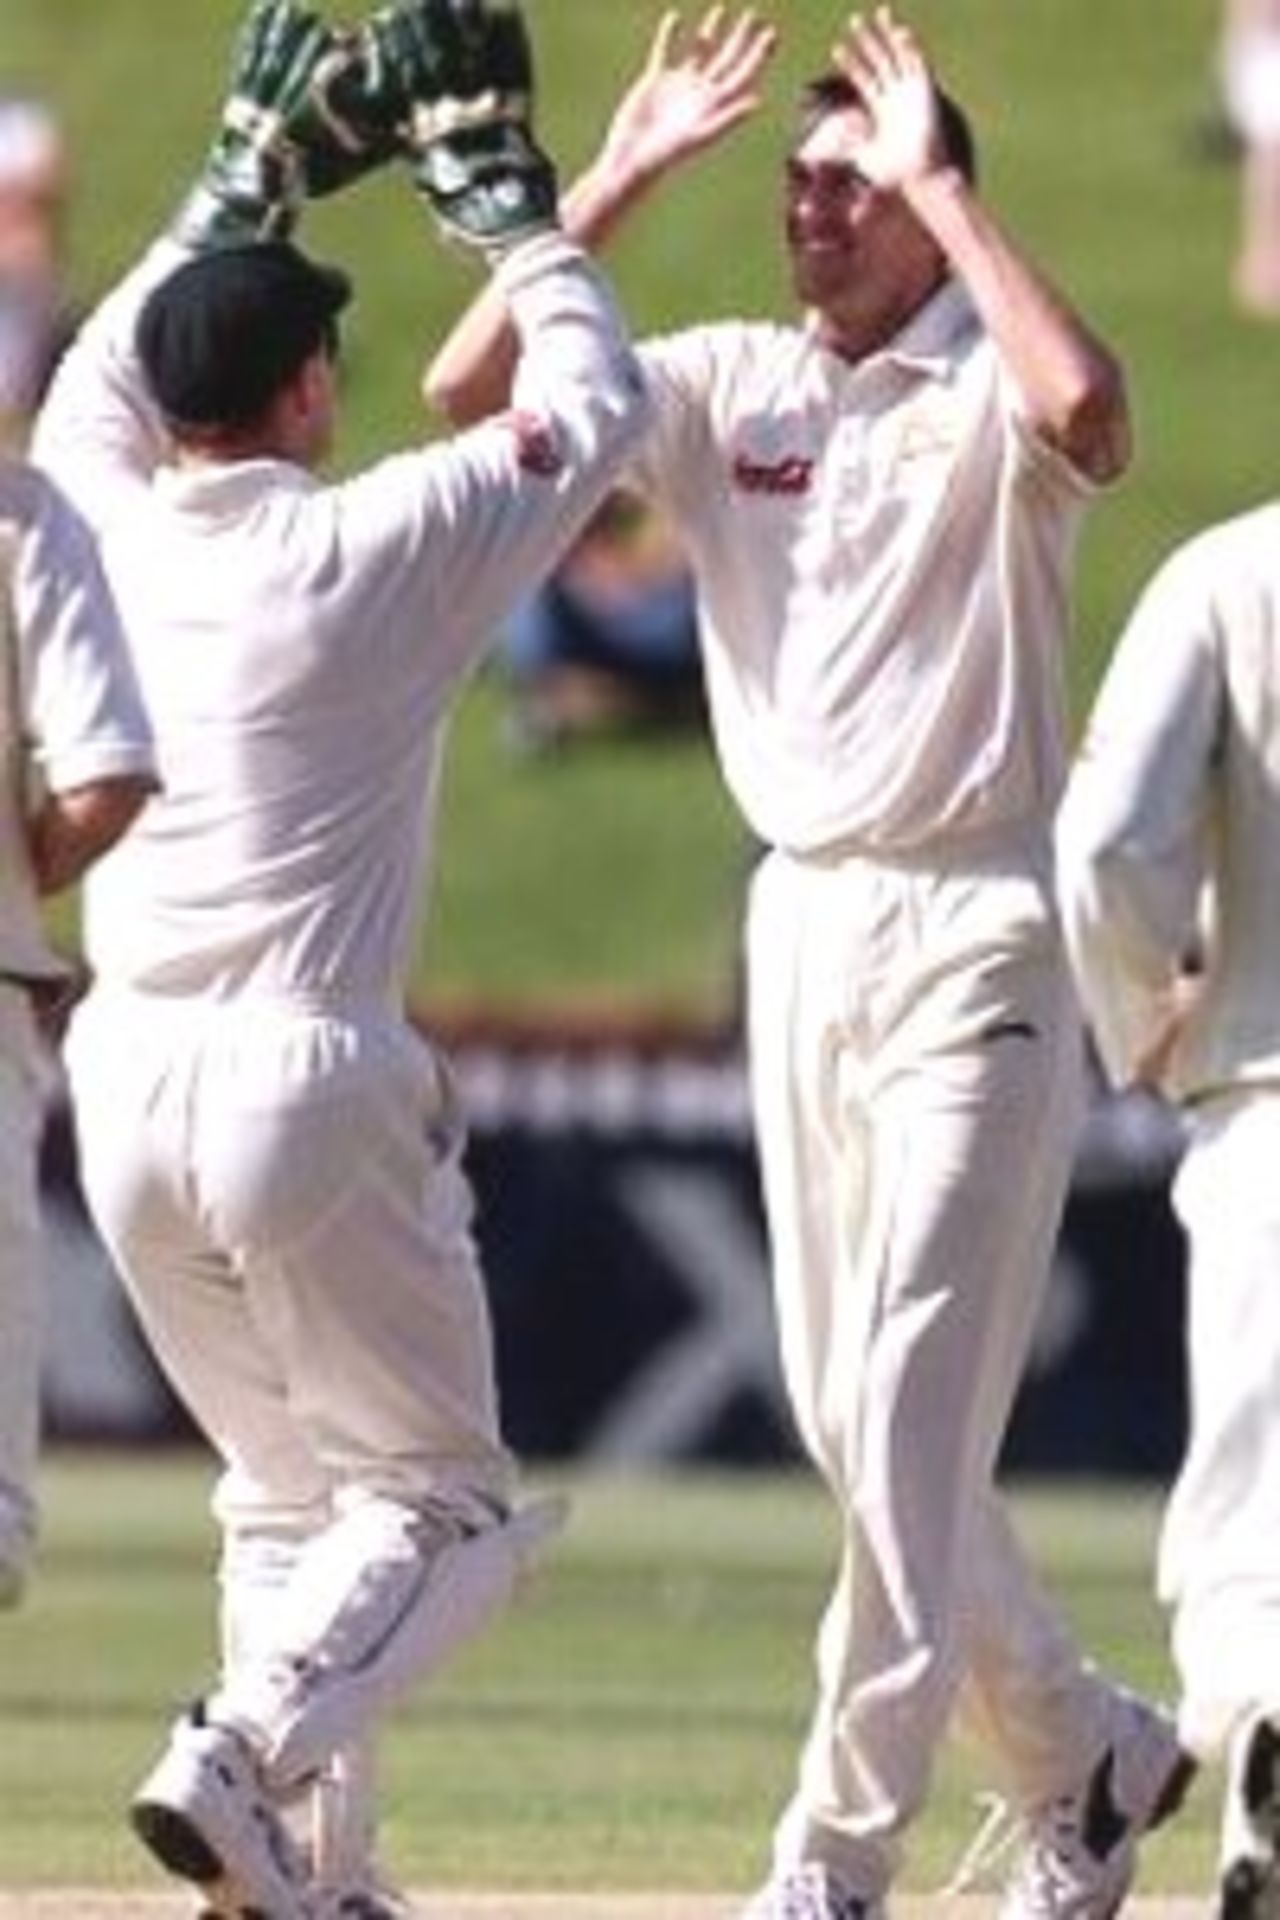 27 Mar 2000: Glenn McGrath (right) celebrates with team mate Adam Gilchrist after claiming the wicket of Chris Cairns of New Zealand LBW, during day four of the second test between New Zealand and Australia at the Basin Reserve, Wellington, New Zealand.